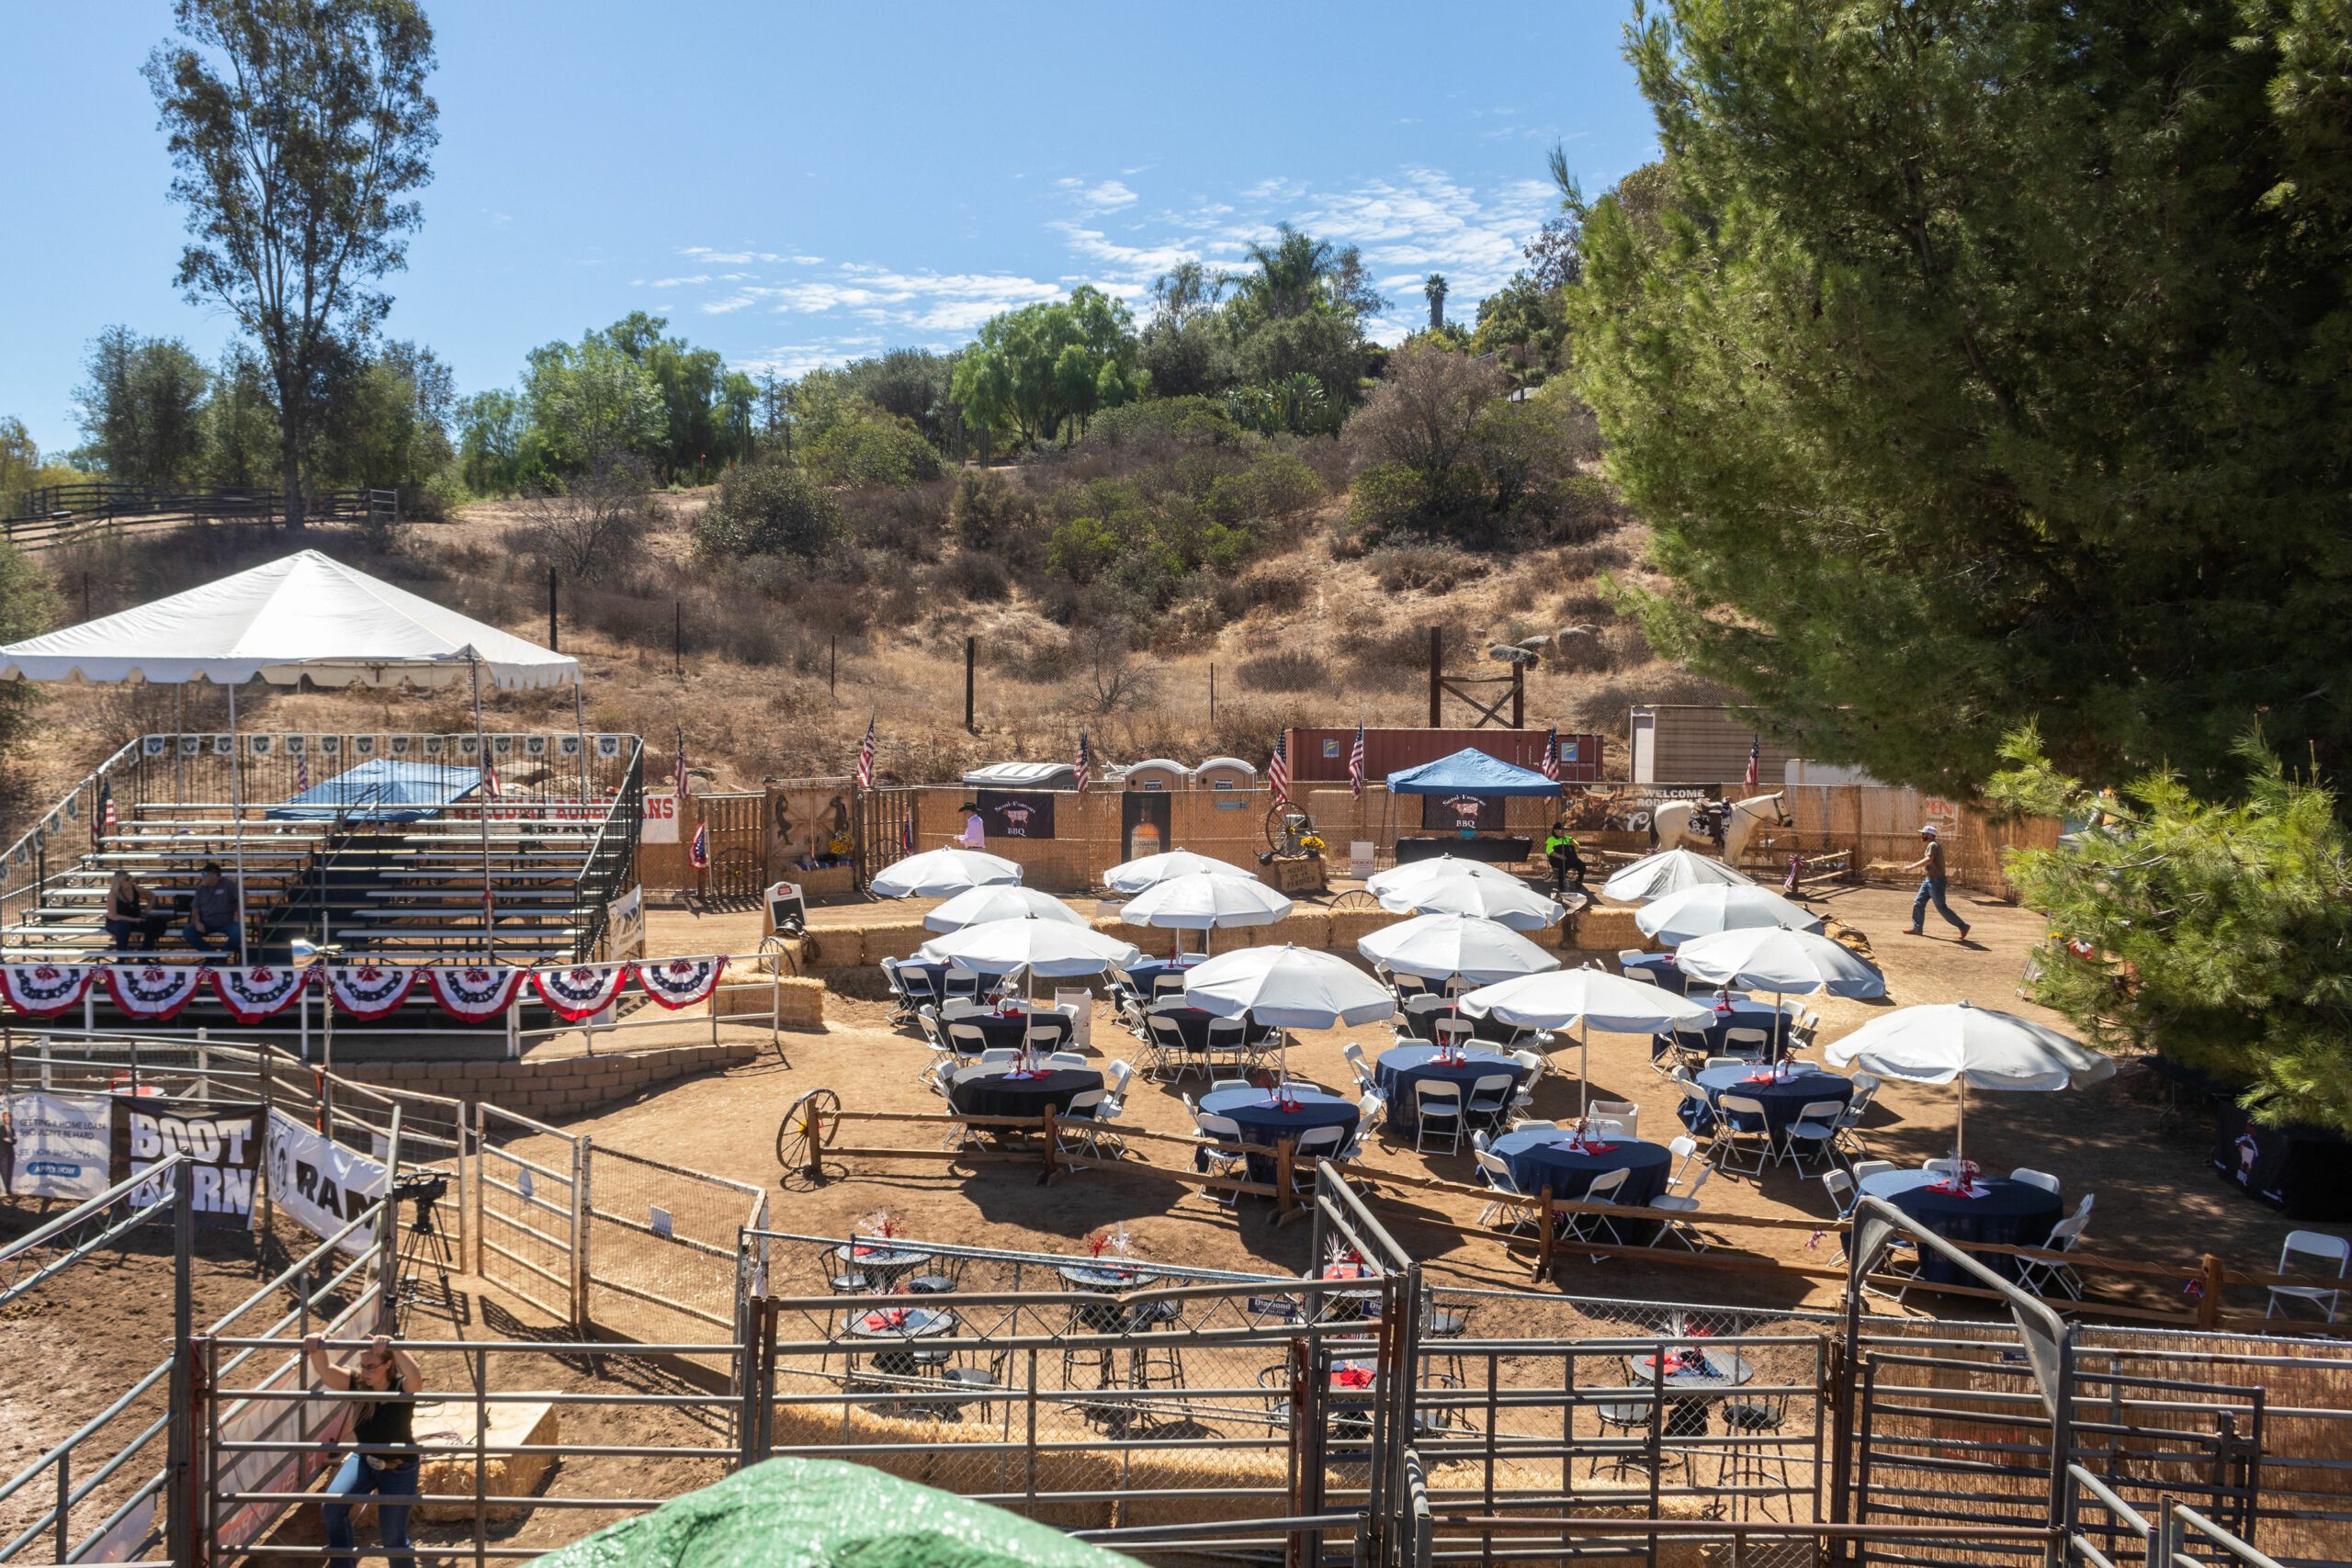 VIP Seating at the Poway Rodeo